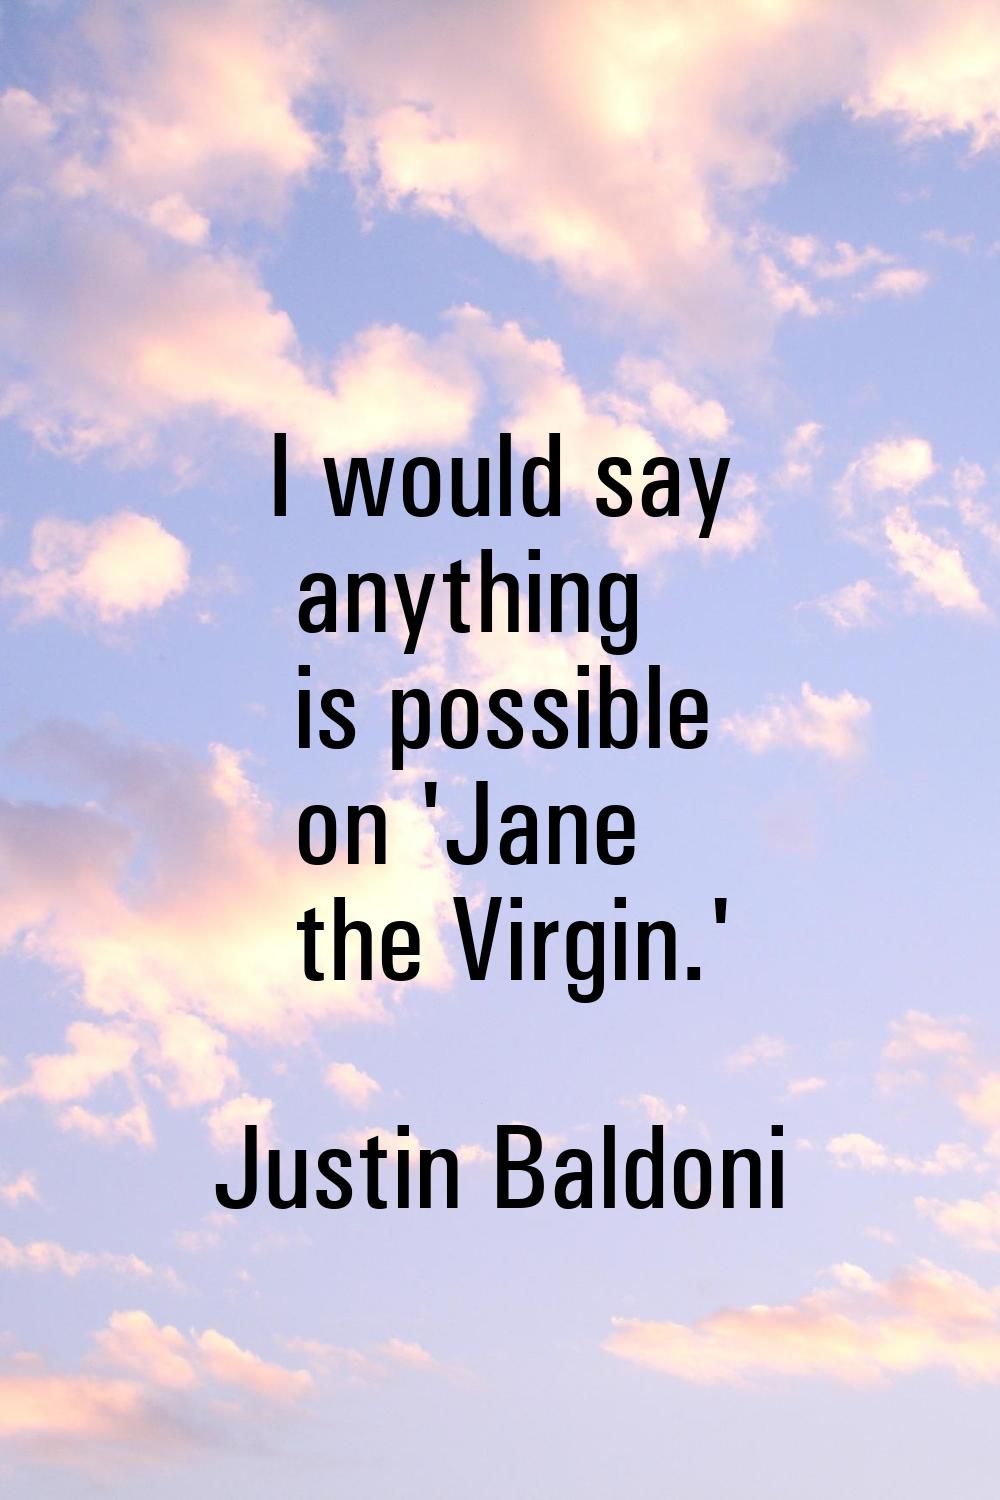 I would say anything is possible on 'Jane the Virgin.'